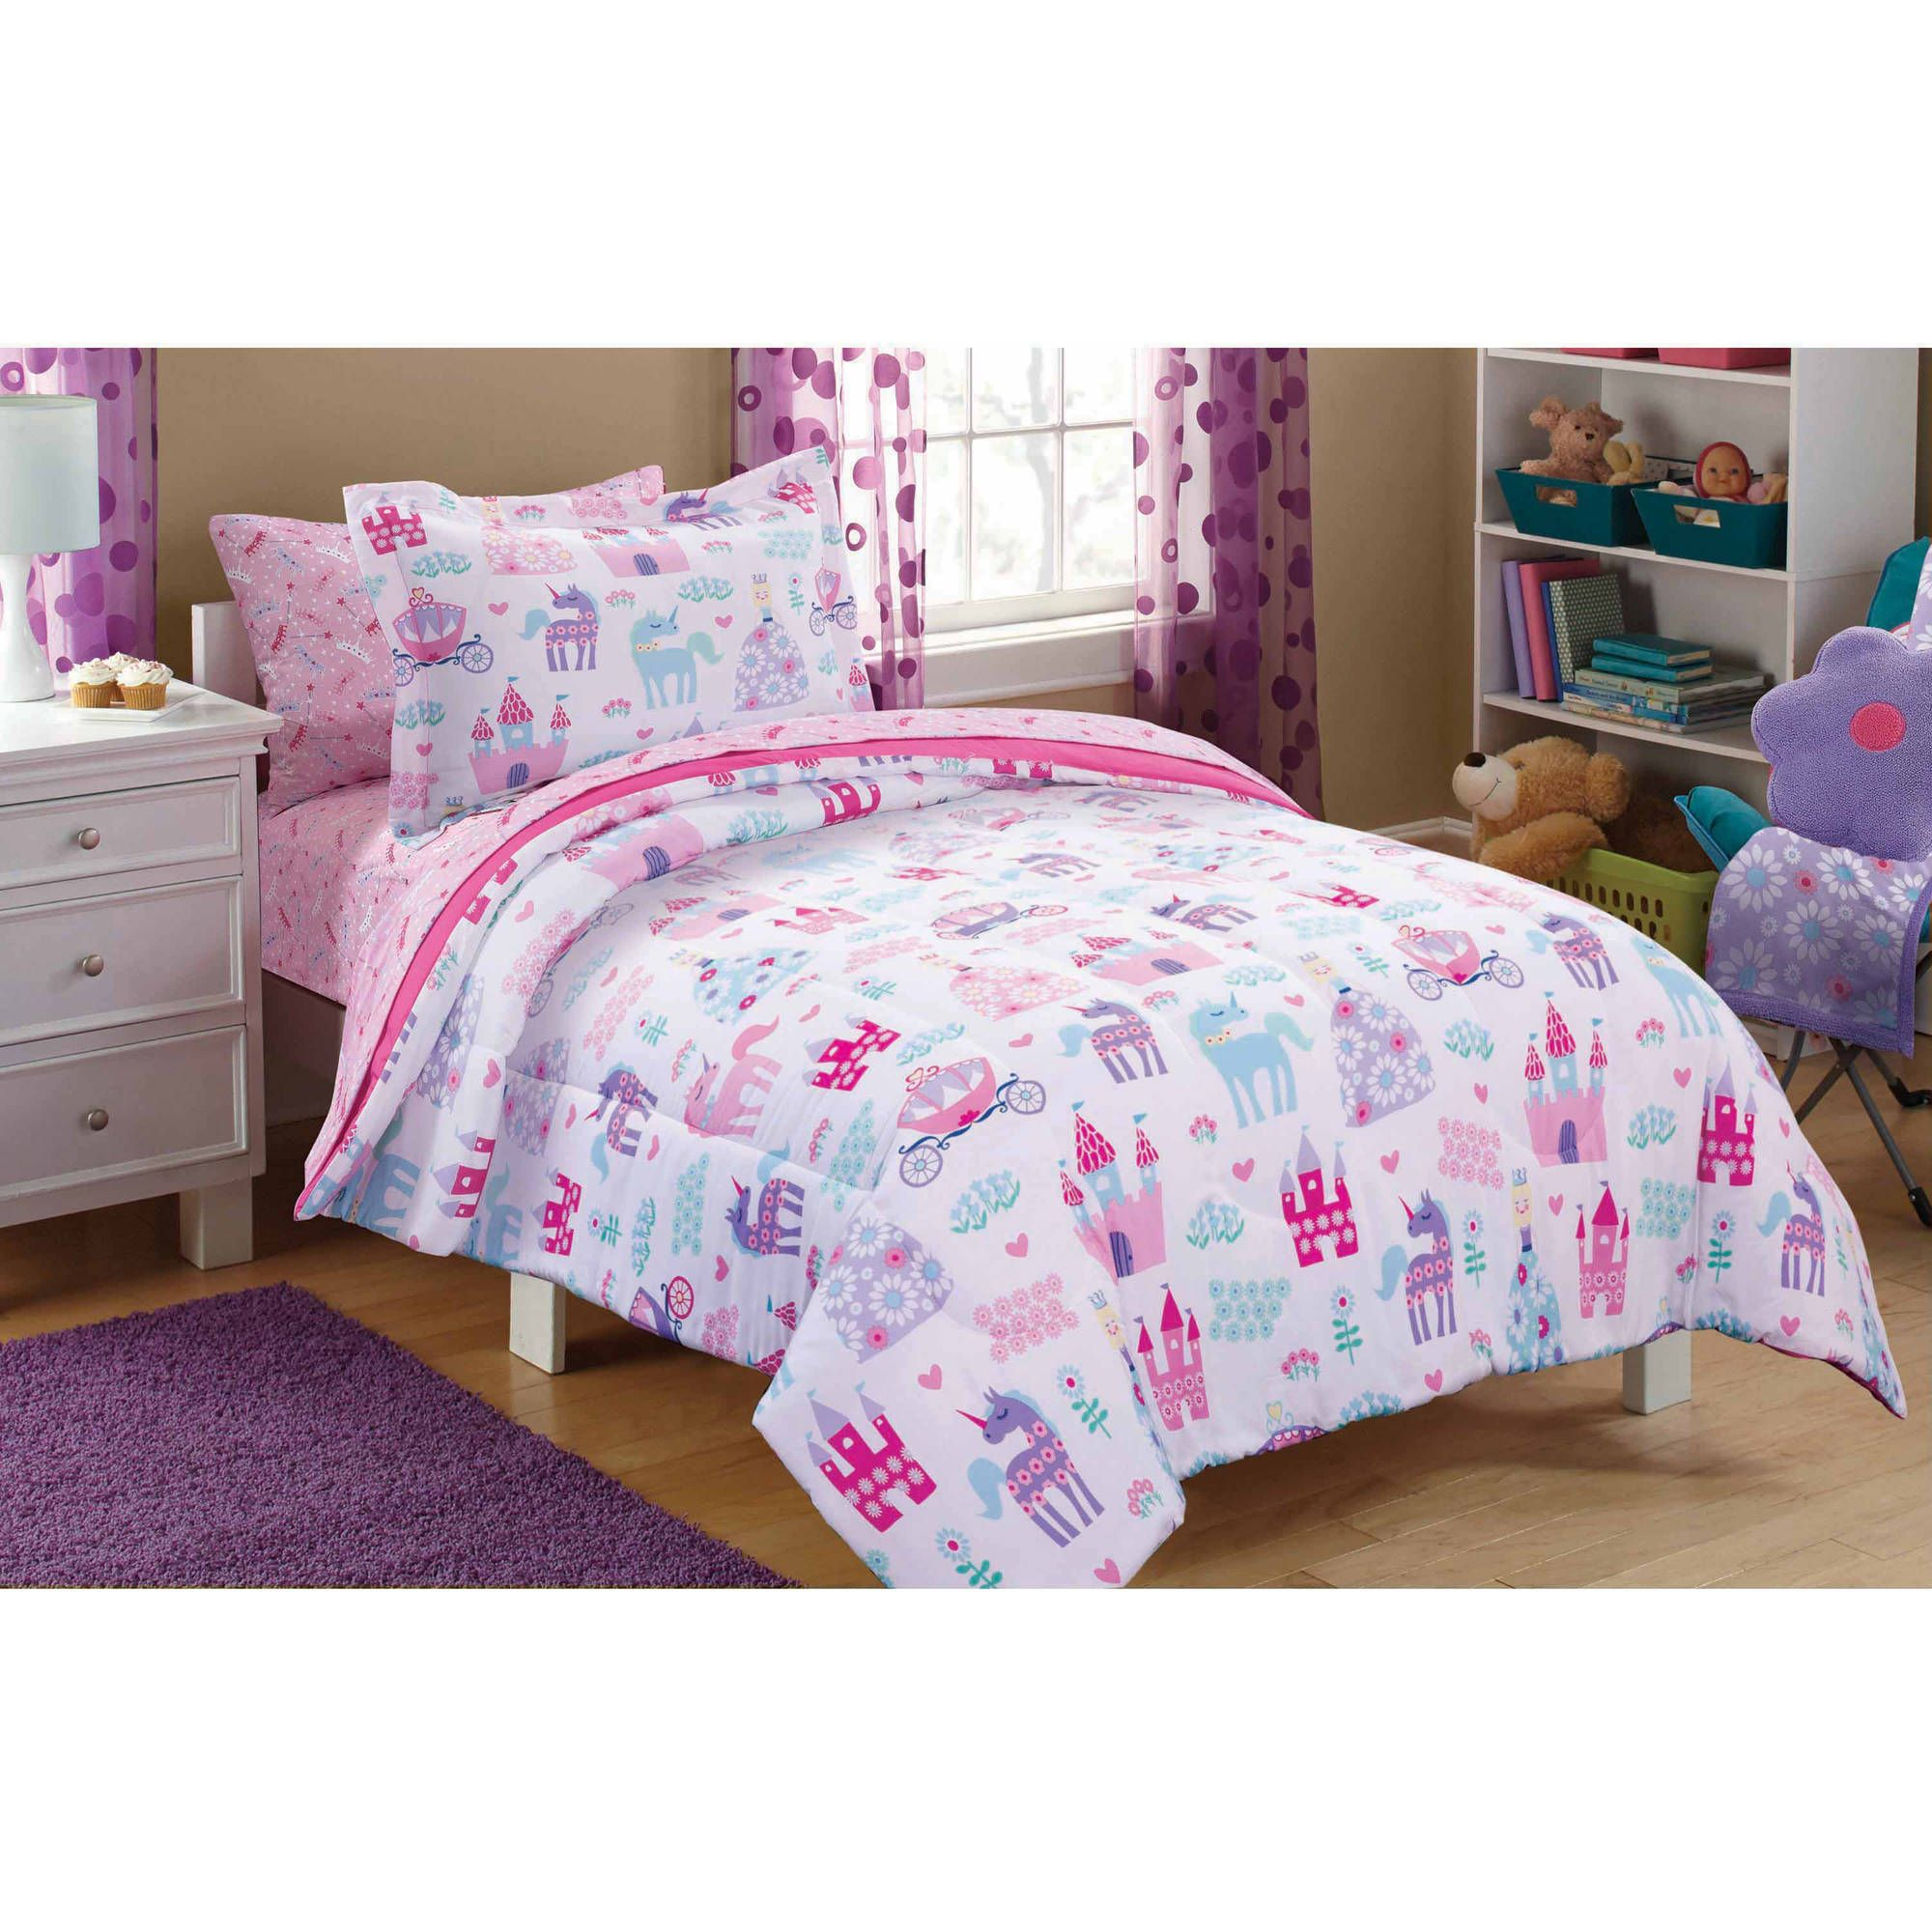 Mainstays Kids Pretty Princess Bed In A Bag Bedding Set Walmart intended for sizing 2000 X 2000